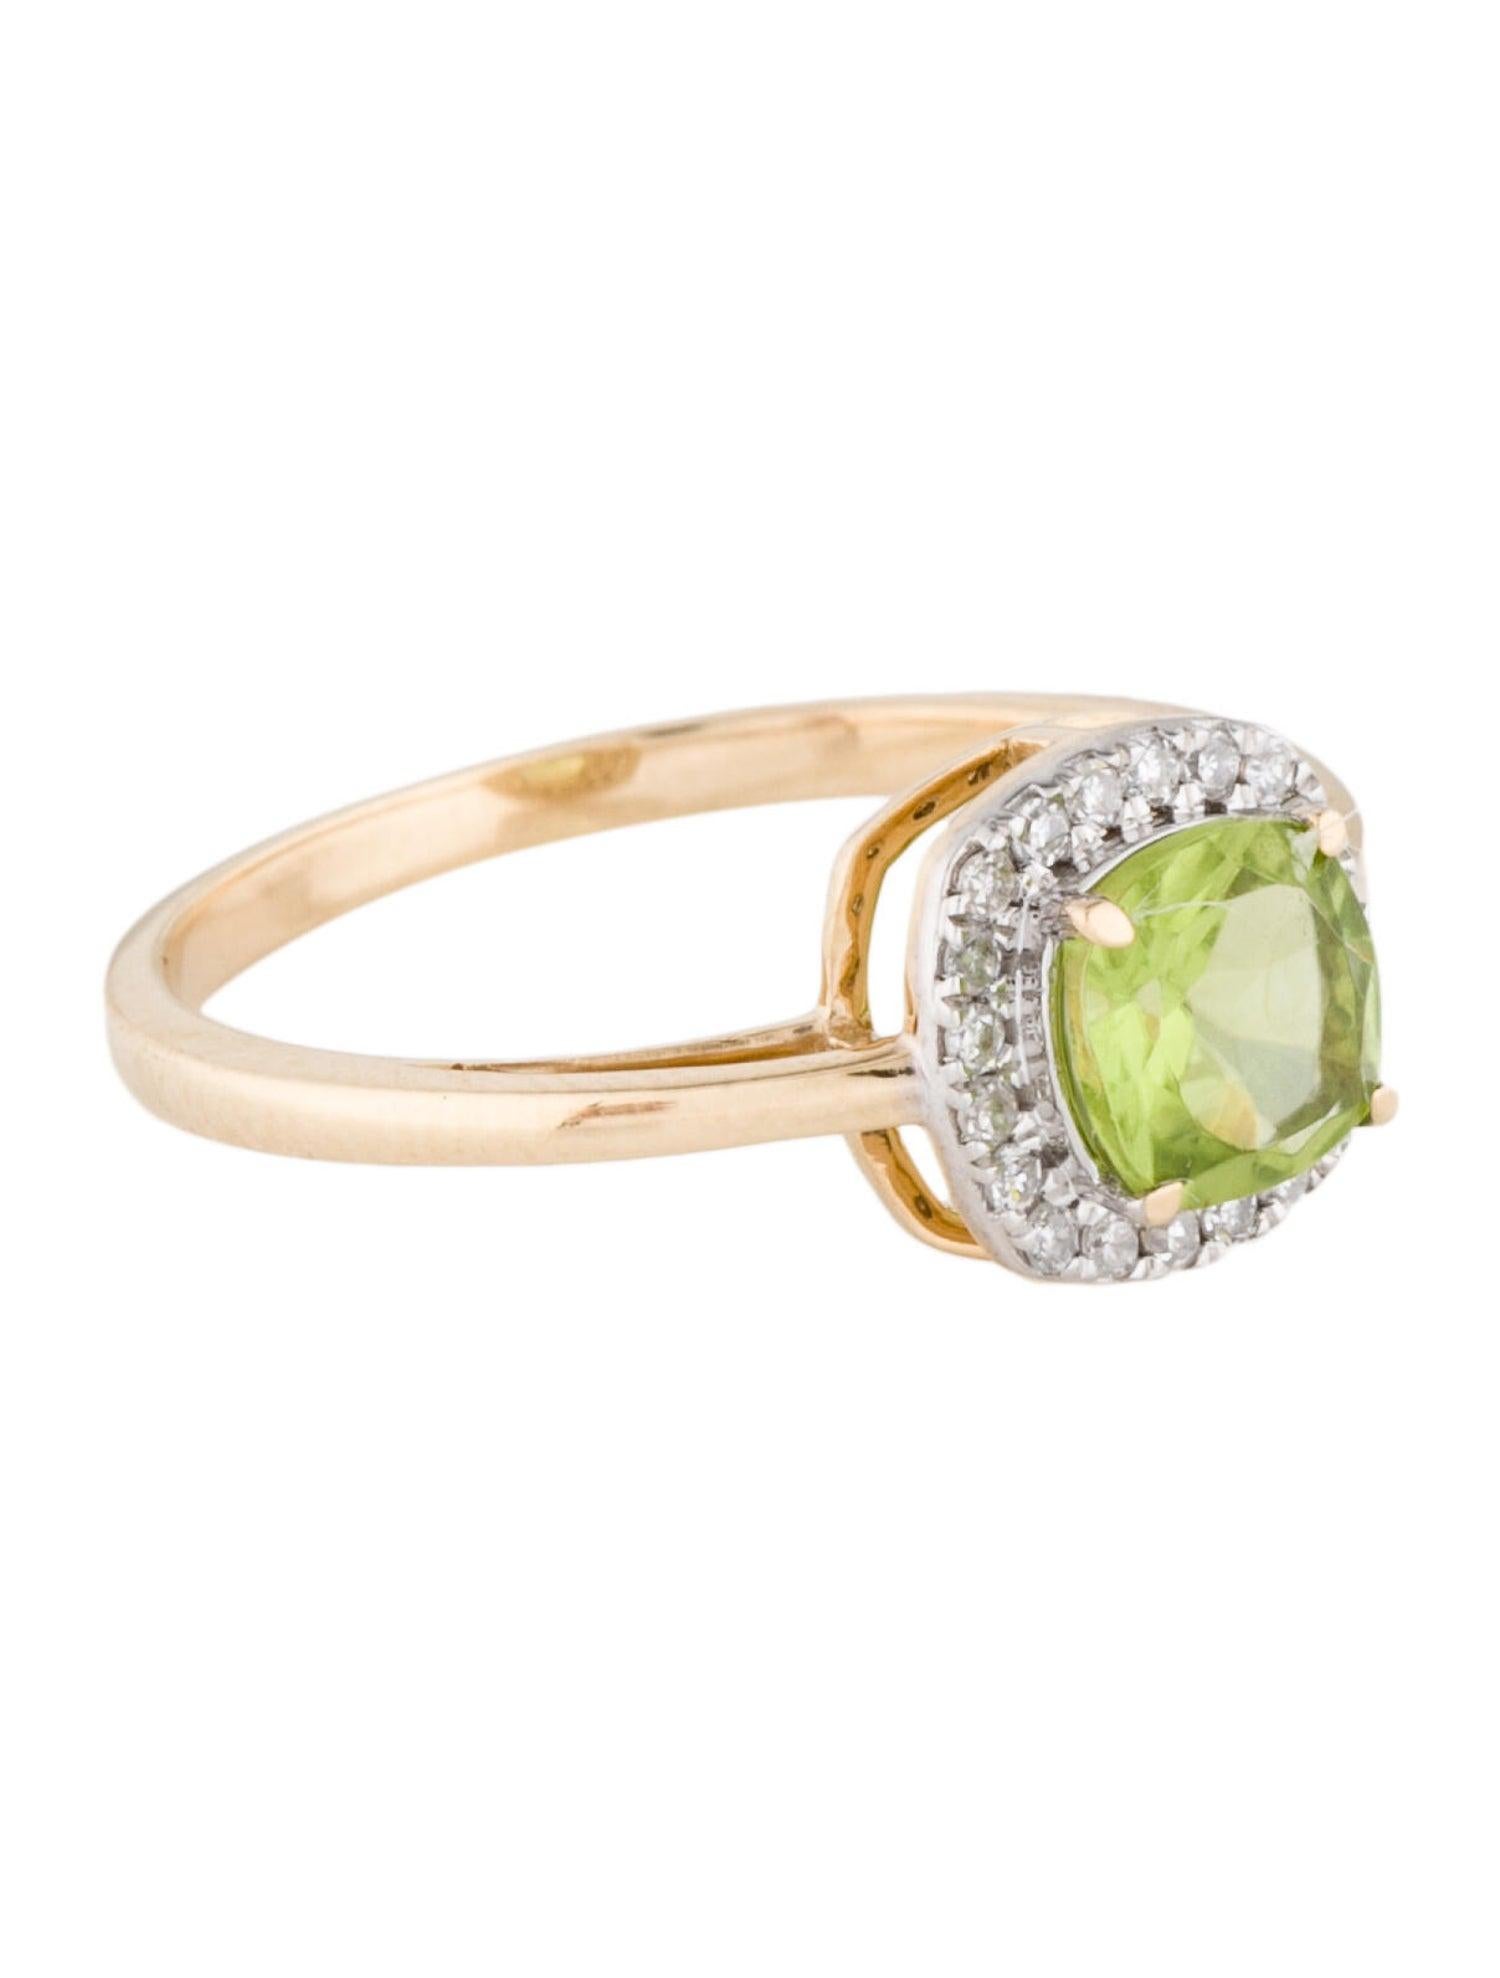 Elevate your style with the exquisite Harmony in Green collection by Jeweltique. This stunning 14k yellow gold ring is a true testament to the timeless beauty of nature's treasures. At its heart lies a magnificent round-cut Peridot, exuding a